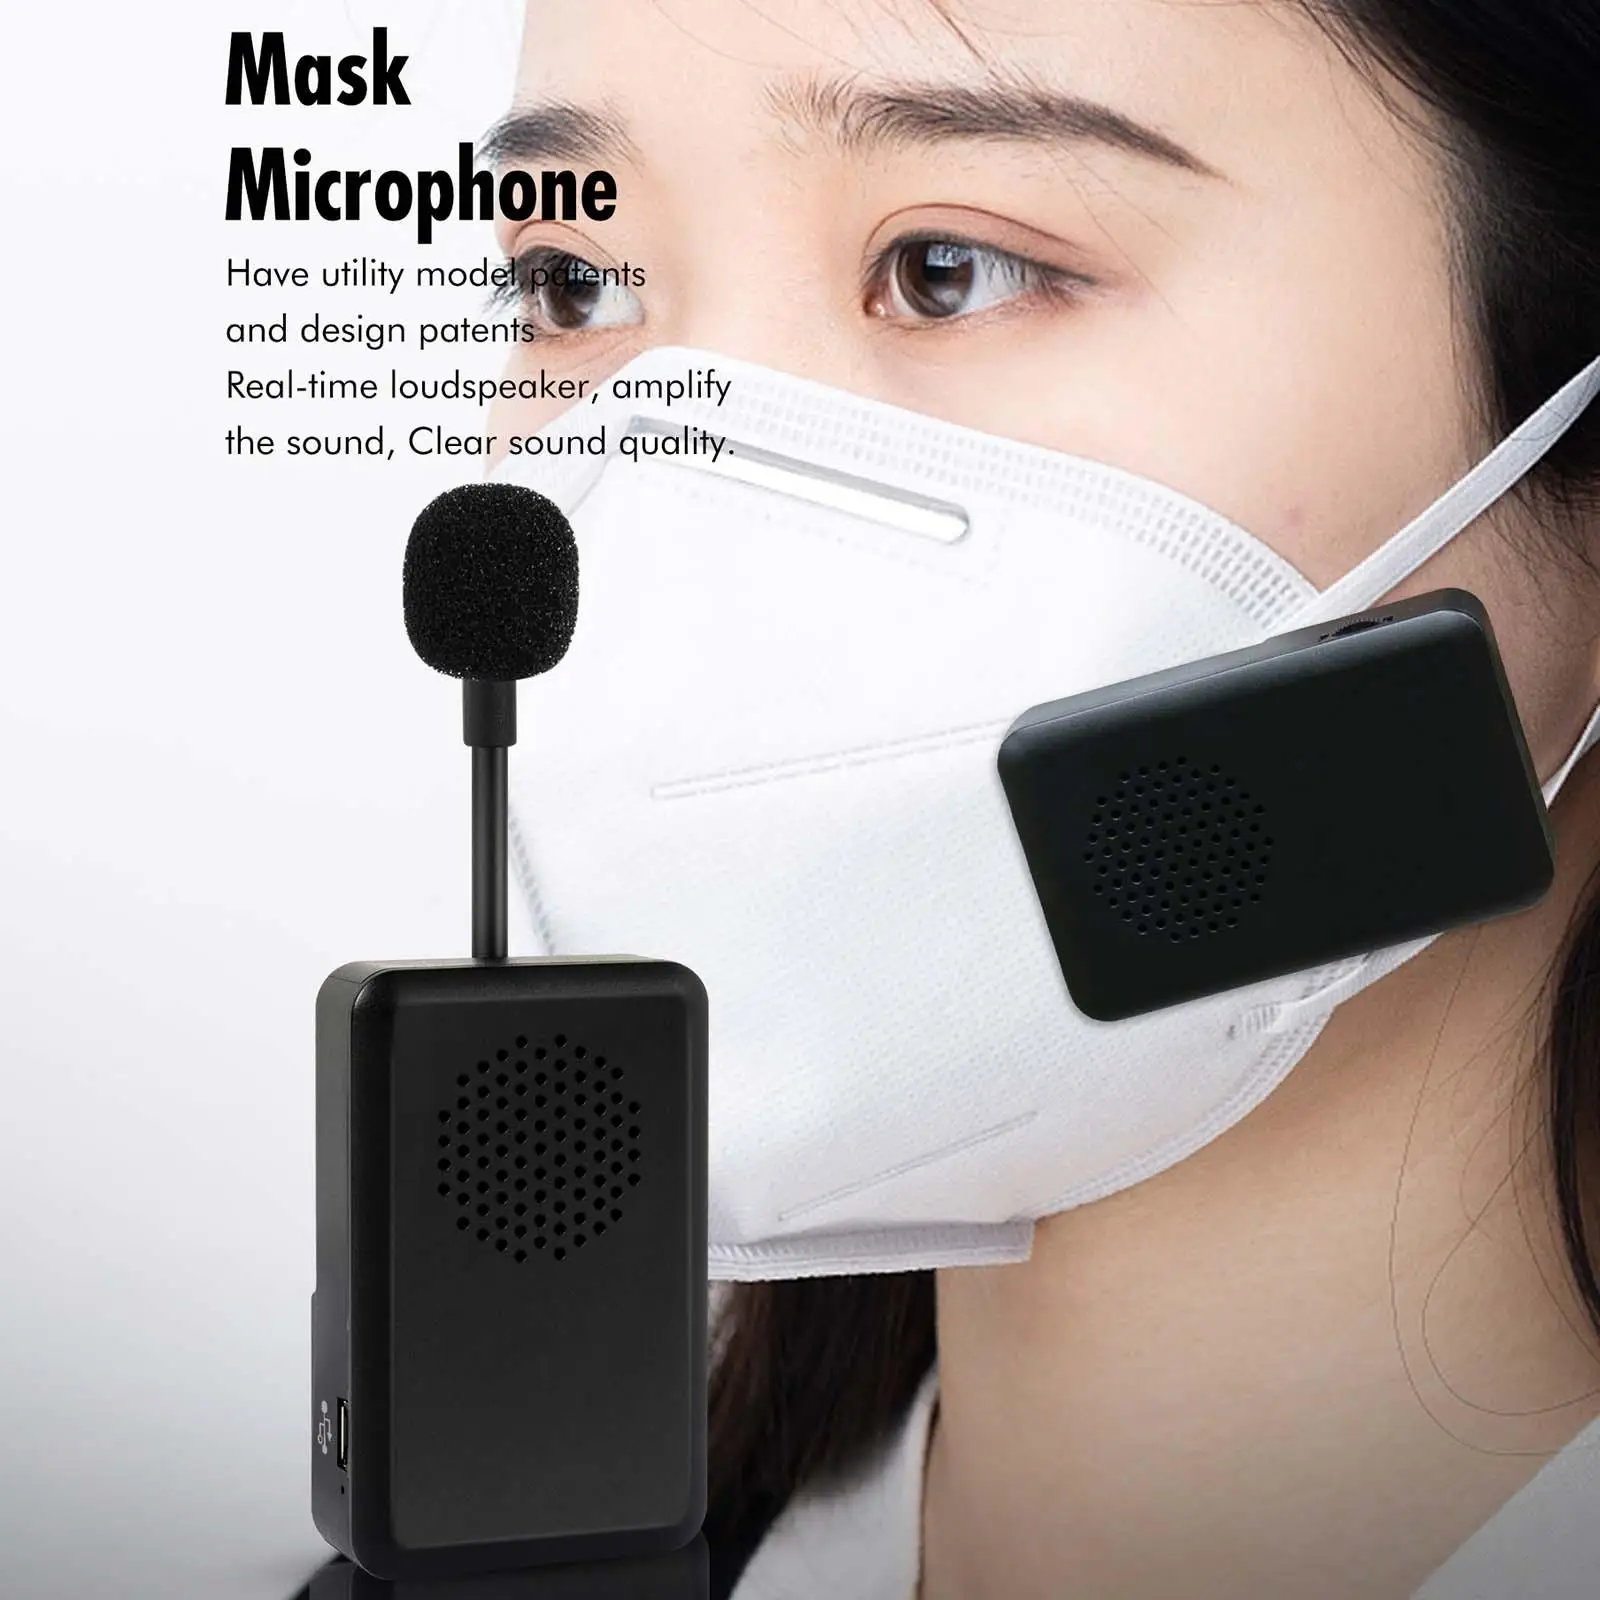 Voice Amplifier Mask Microphone Comfortable to Wear Loudspeaker Mic Speaker for Training Teaching Yoga Classroom Meeting